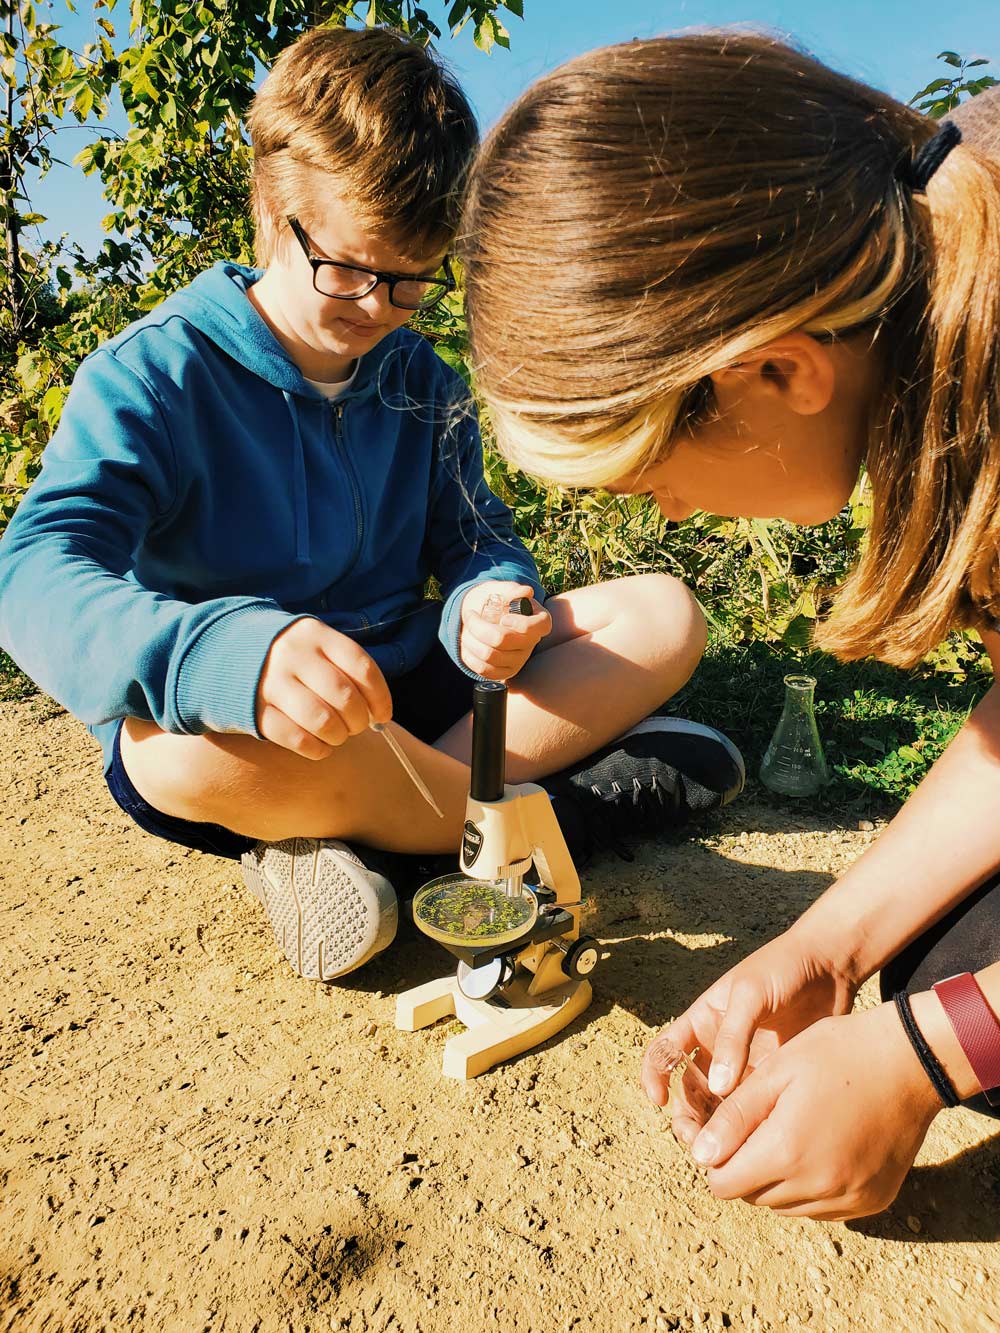 camp kids using microscope out in nature